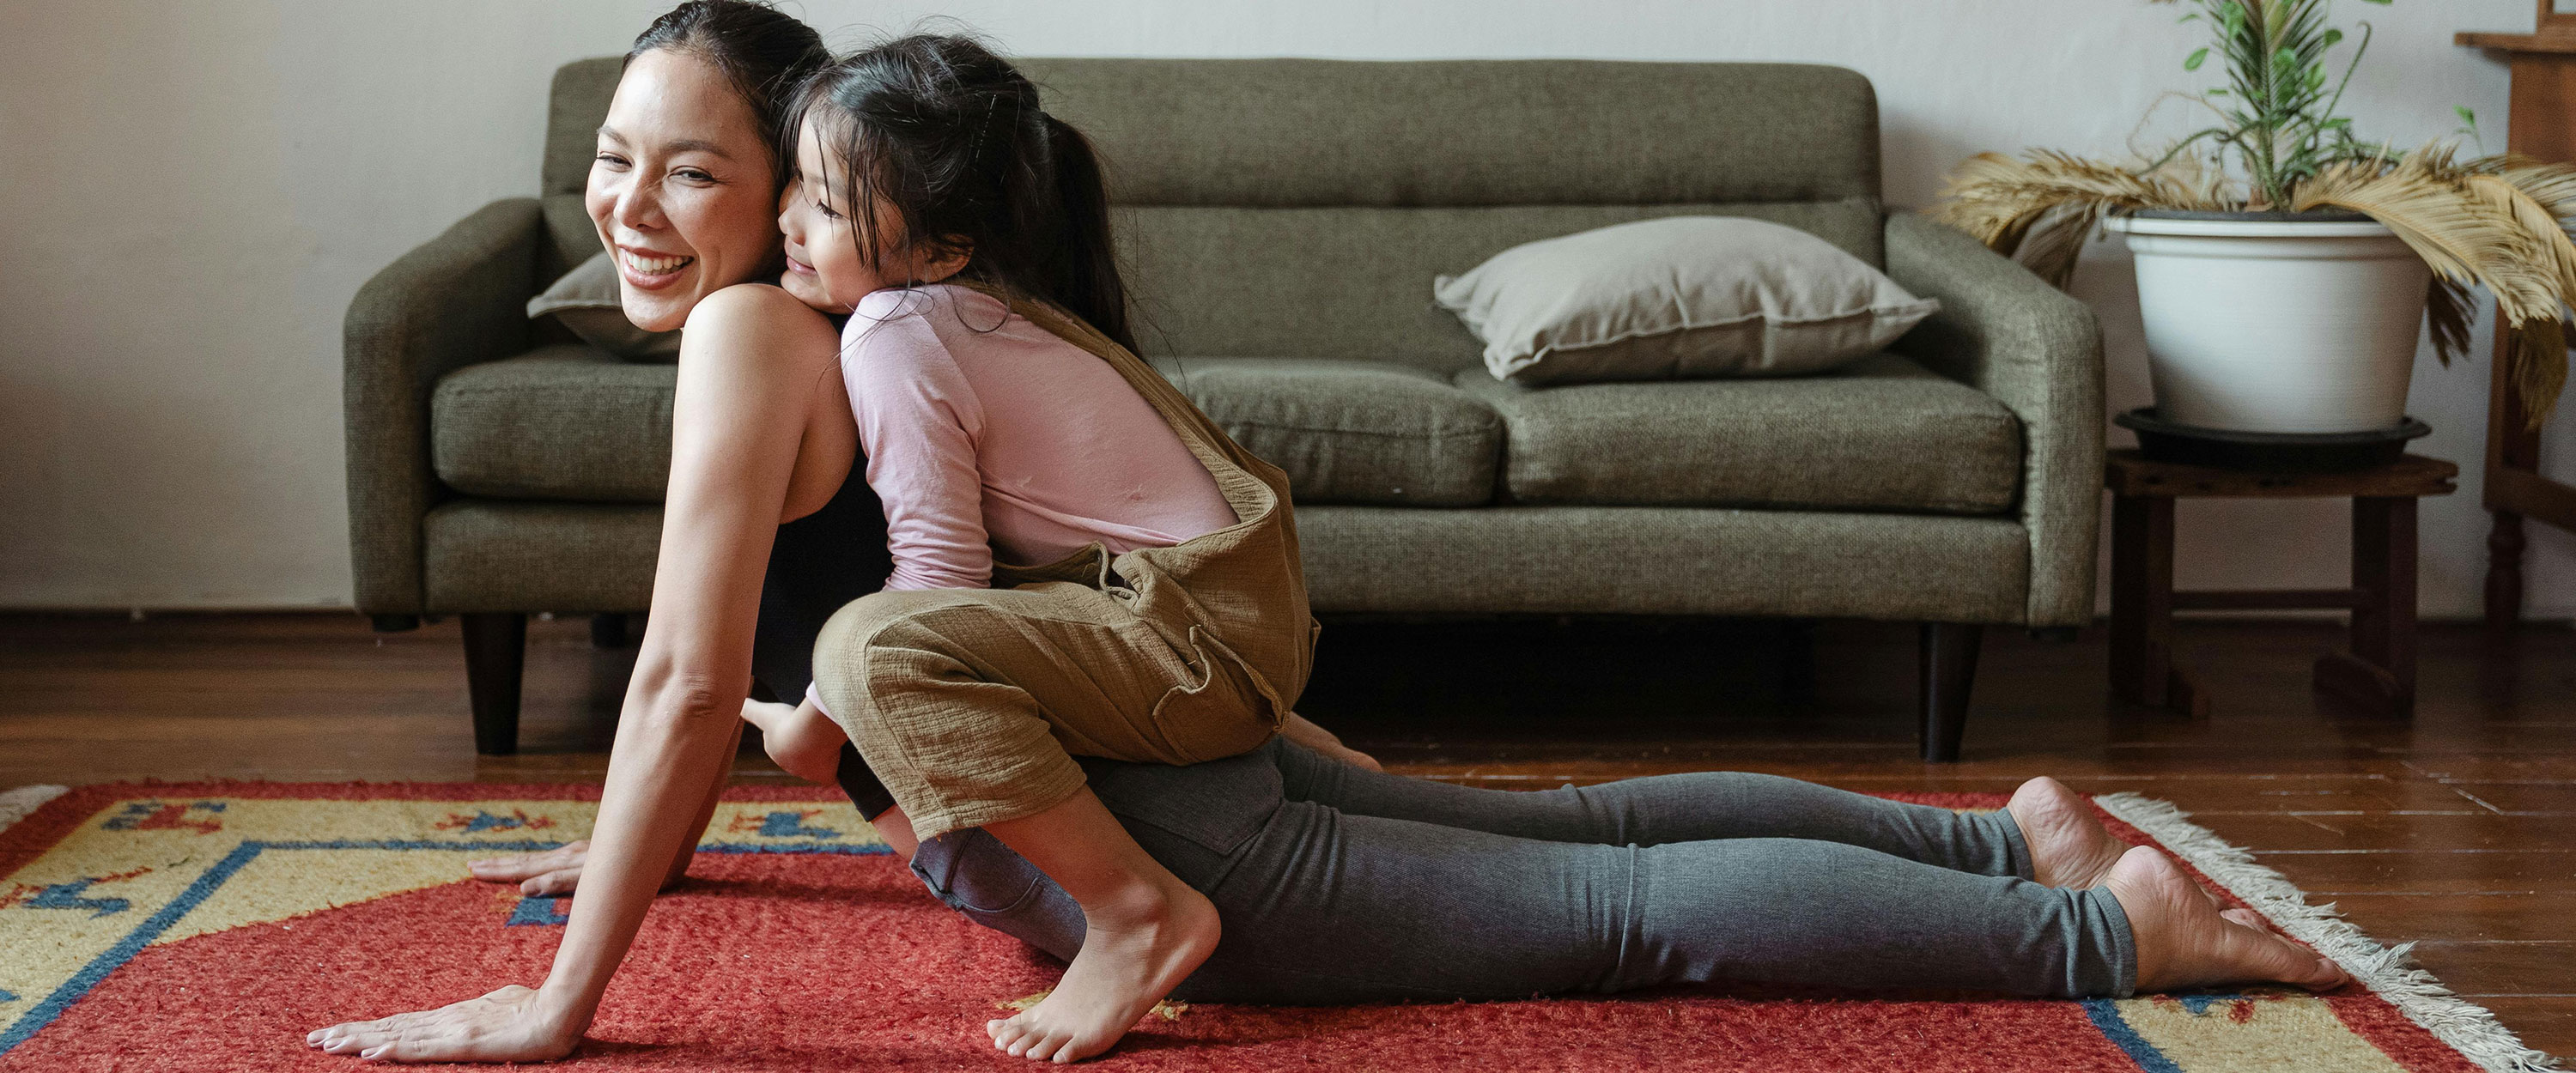 person does yoga while child is on their back